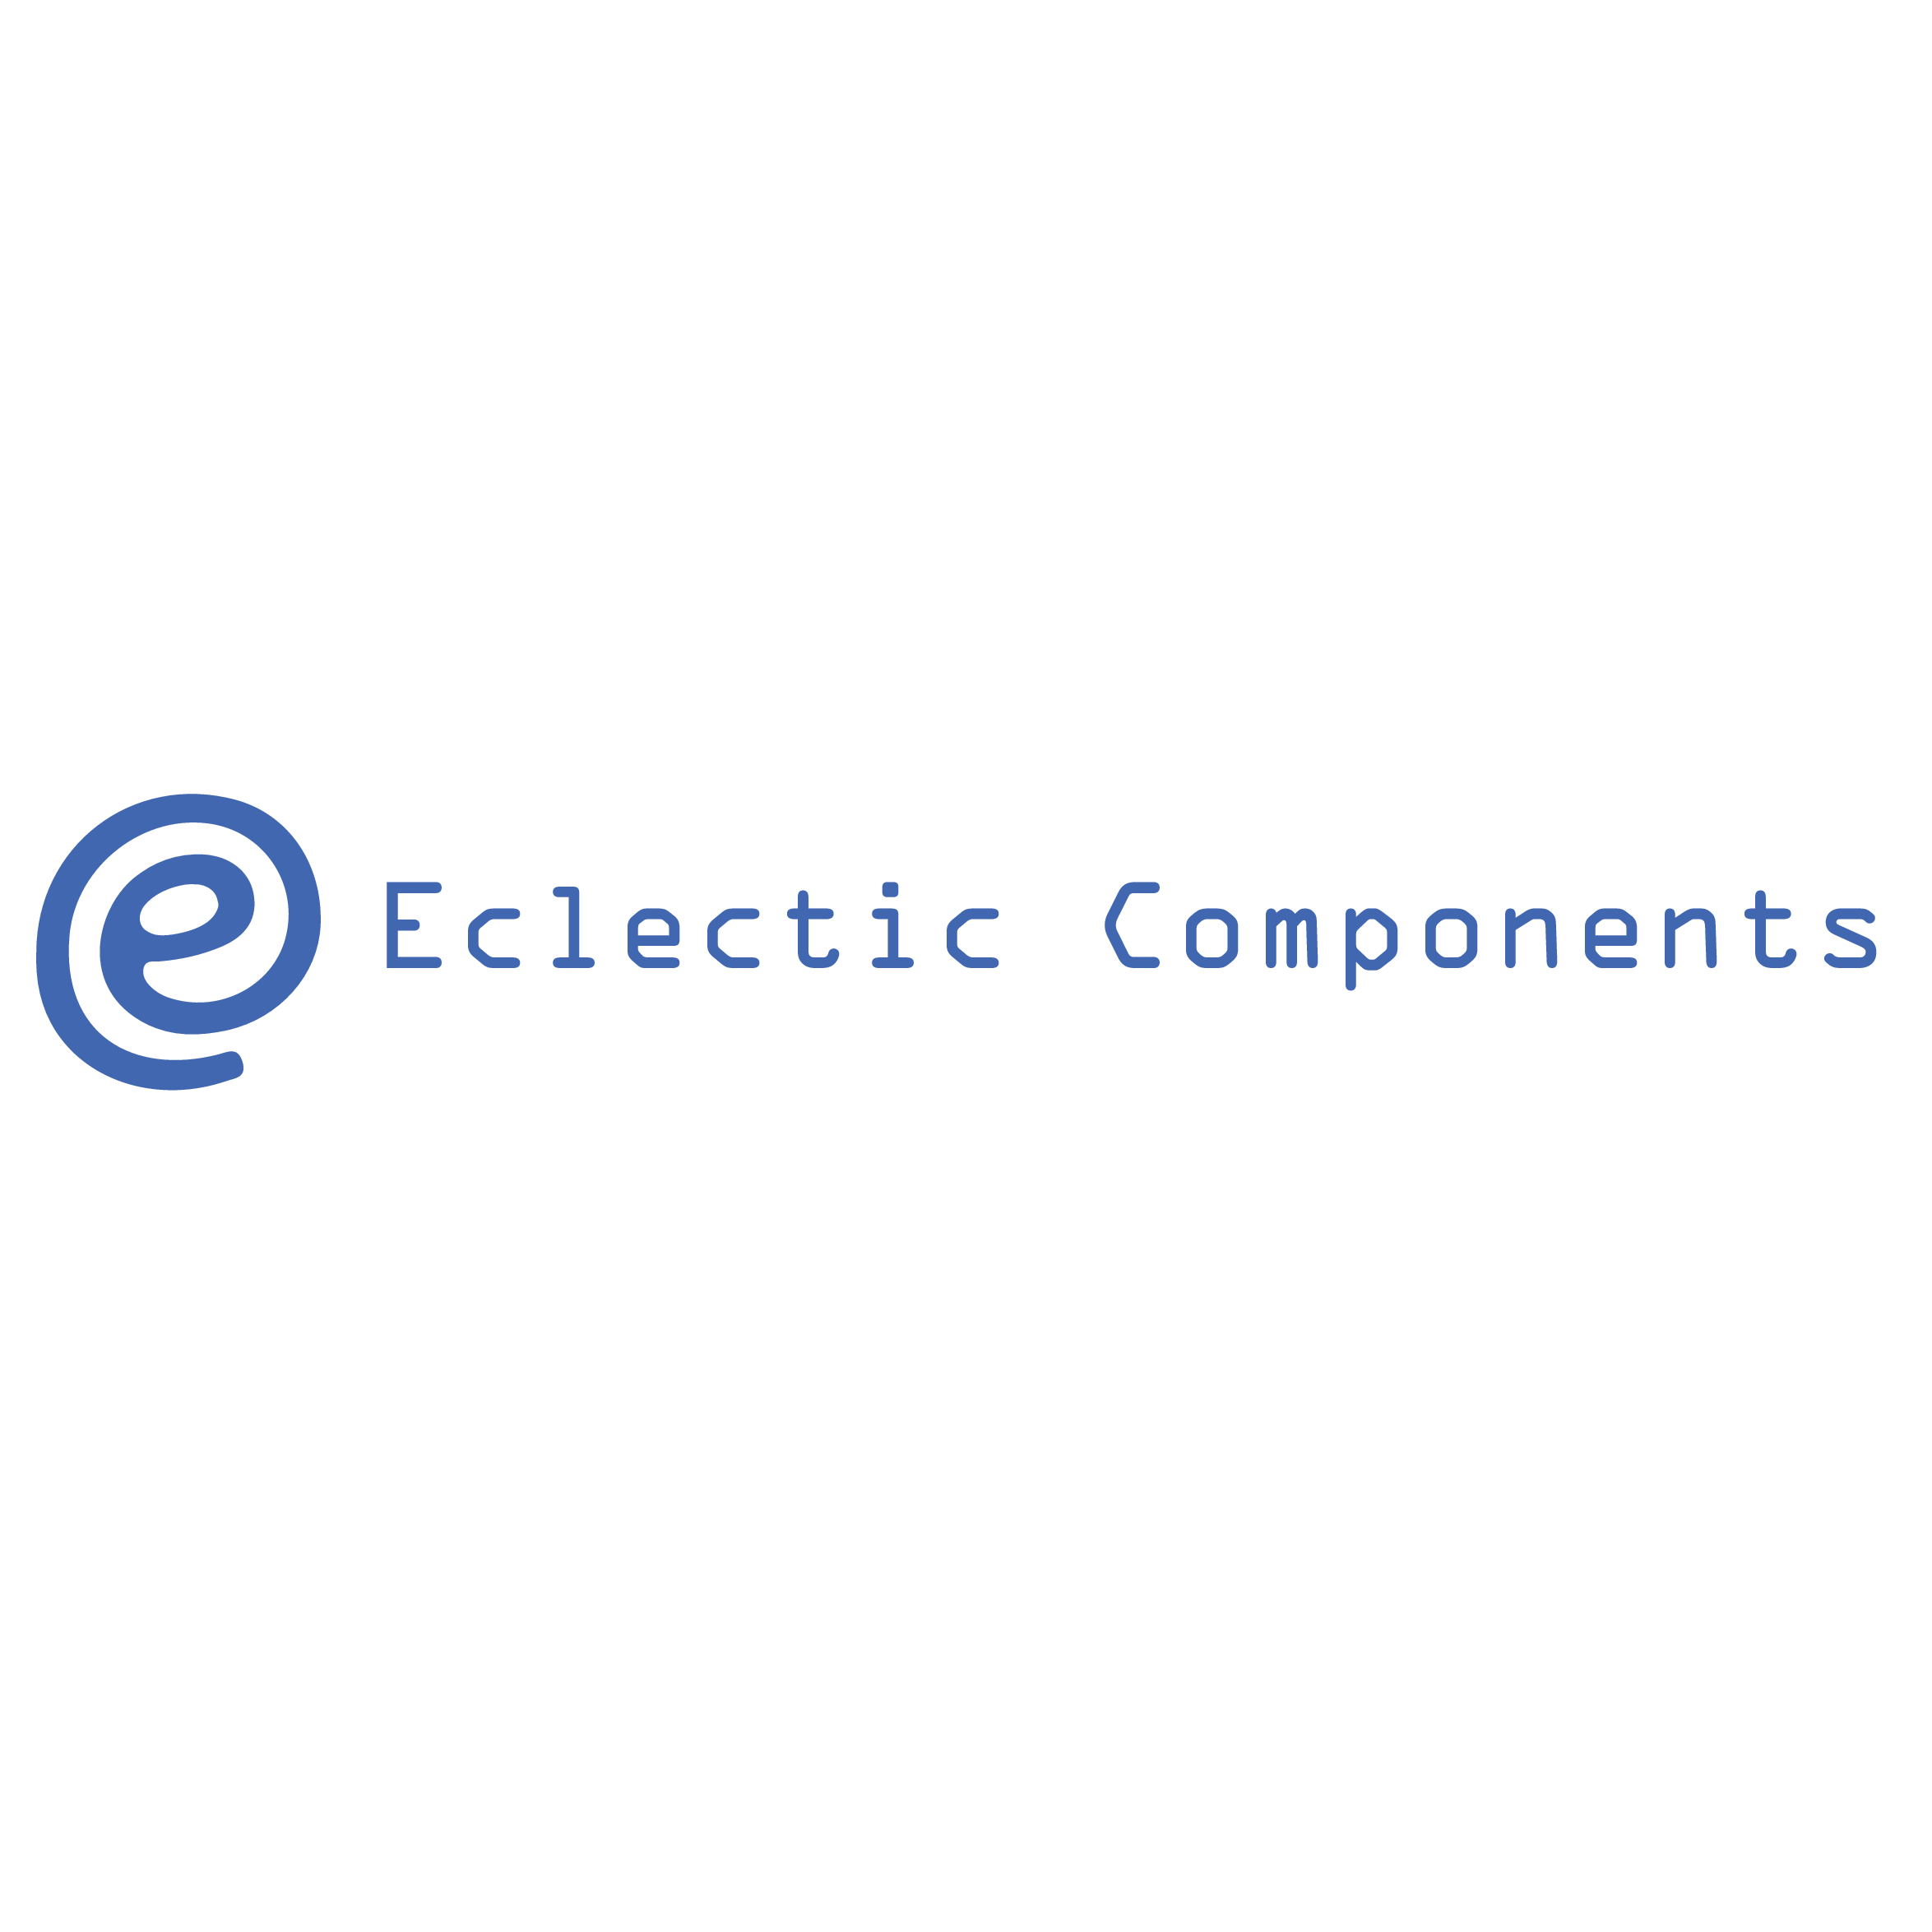 Eclectic Components